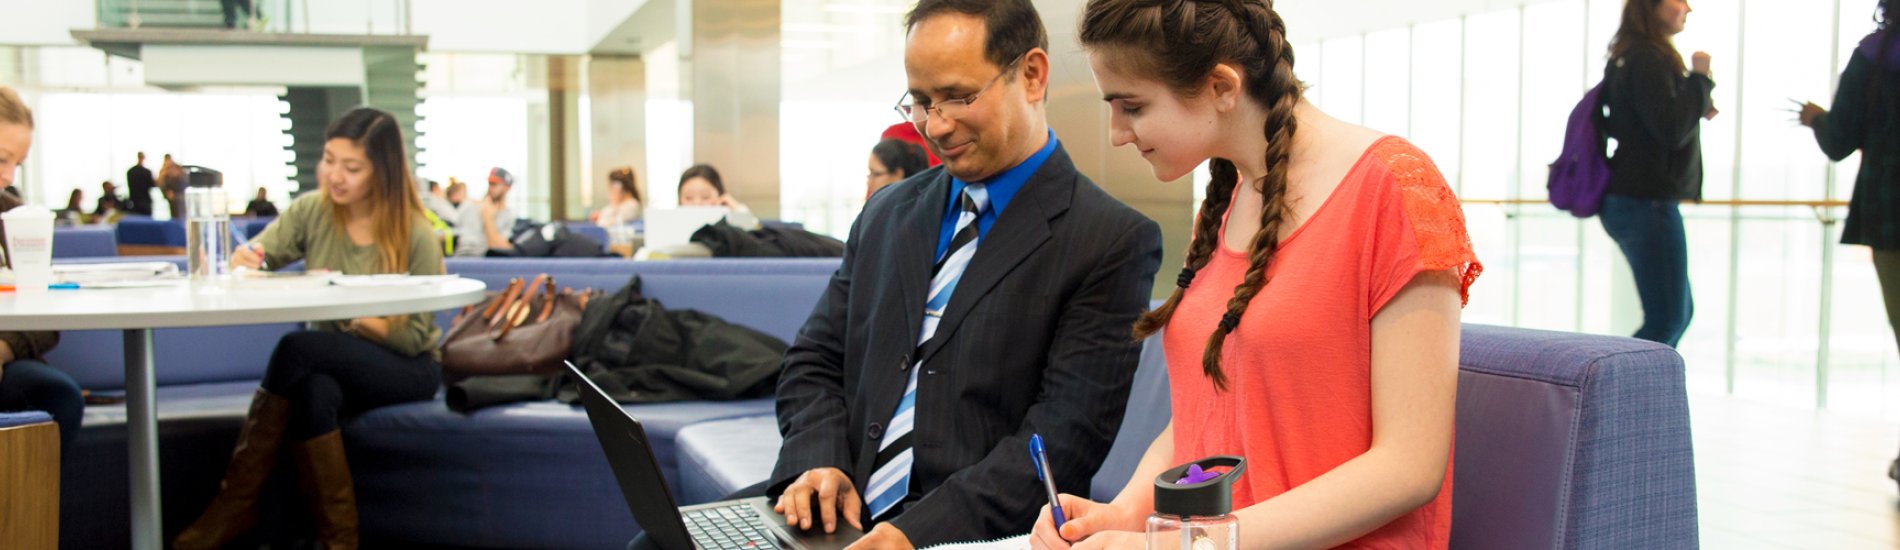 UAlbany professor Pradeep Atrey works with a student on a laptop computer.